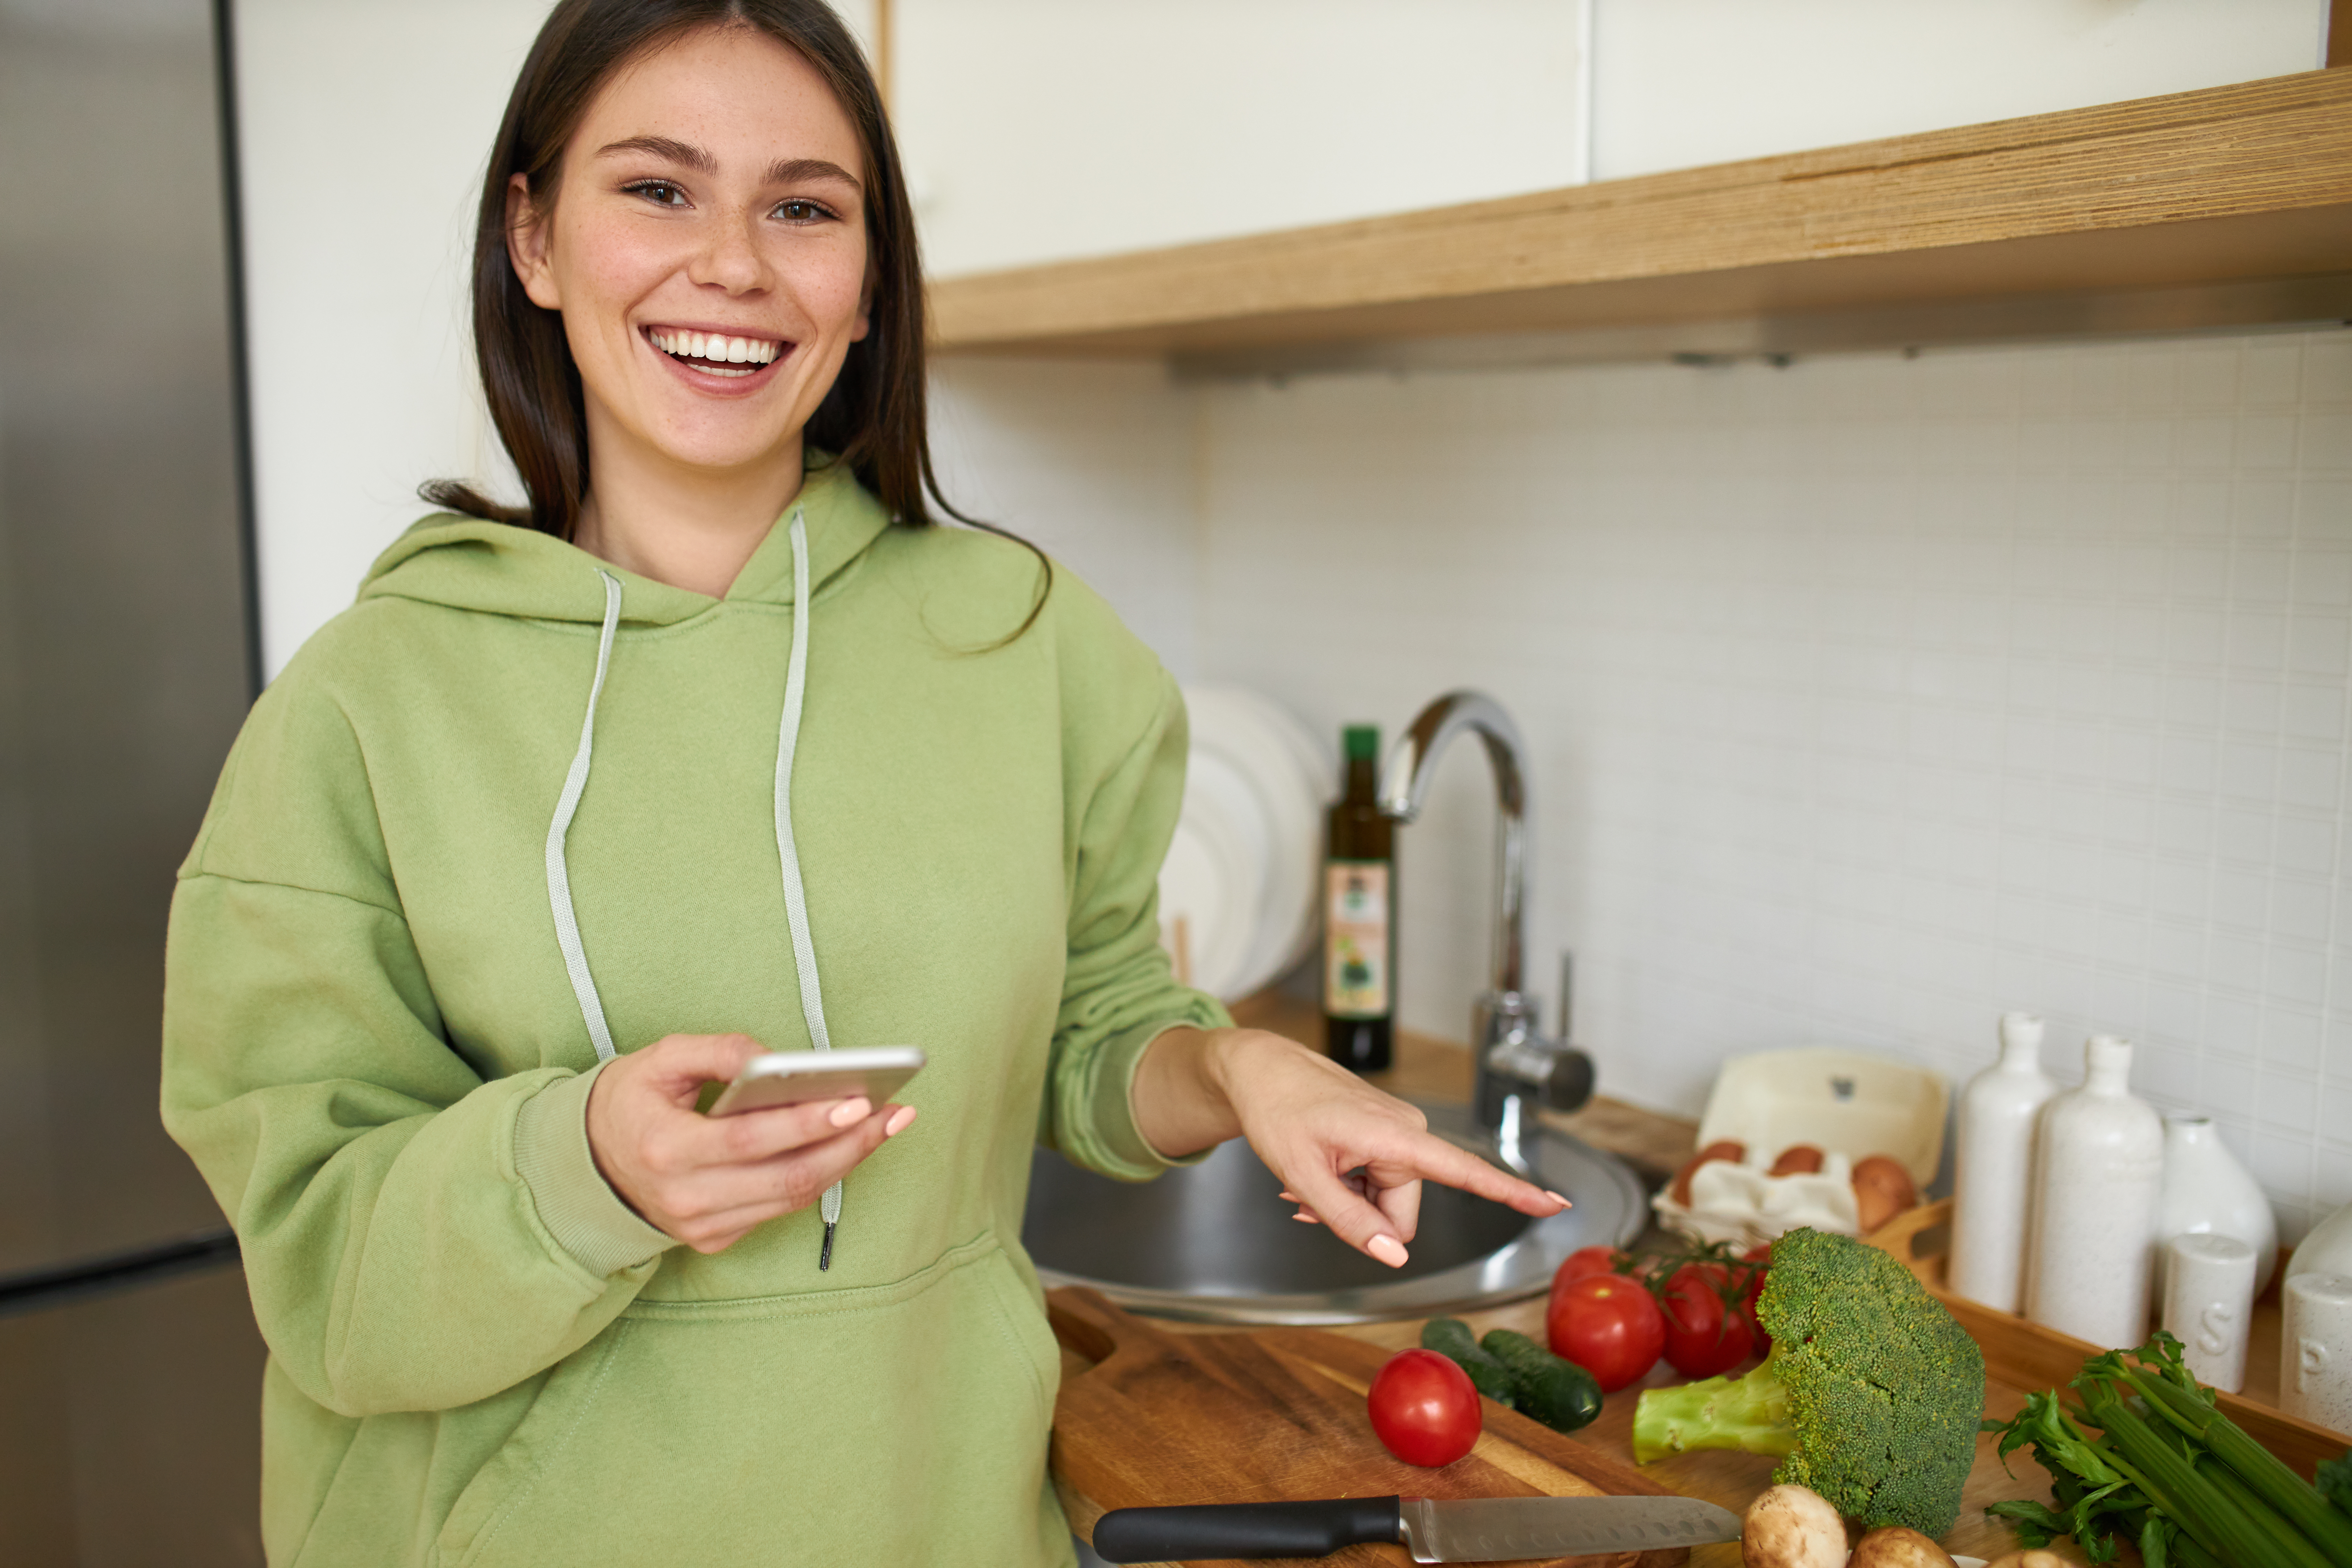 A young woman pointing at food in the kitchen | Source: Shutterstock